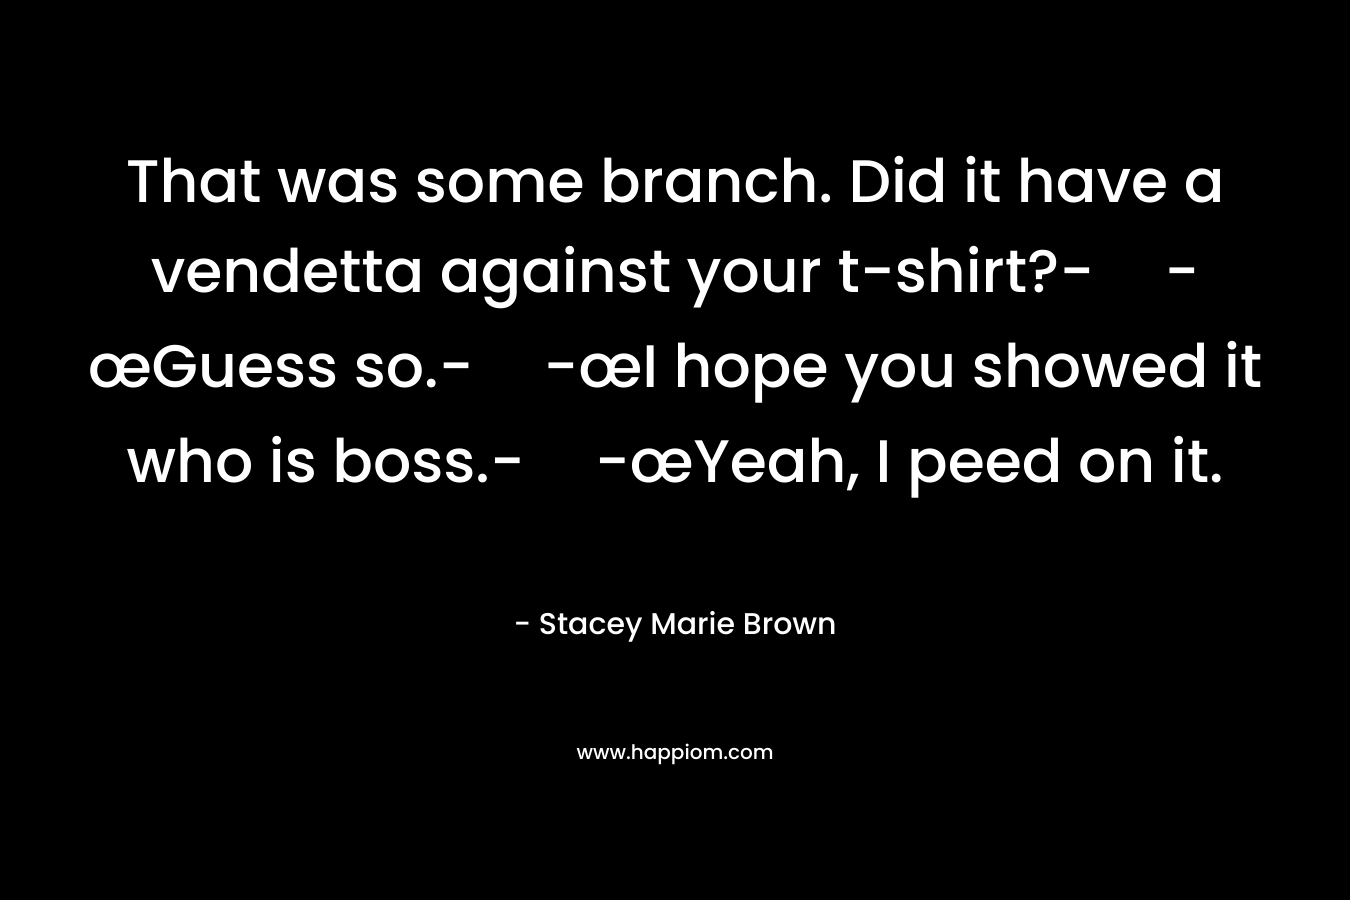 That was some branch. Did it have a vendetta against your t-shirt?--œGuess so.--œI hope you showed it who is boss.--œYeah, I peed on it. – Stacey Marie Brown